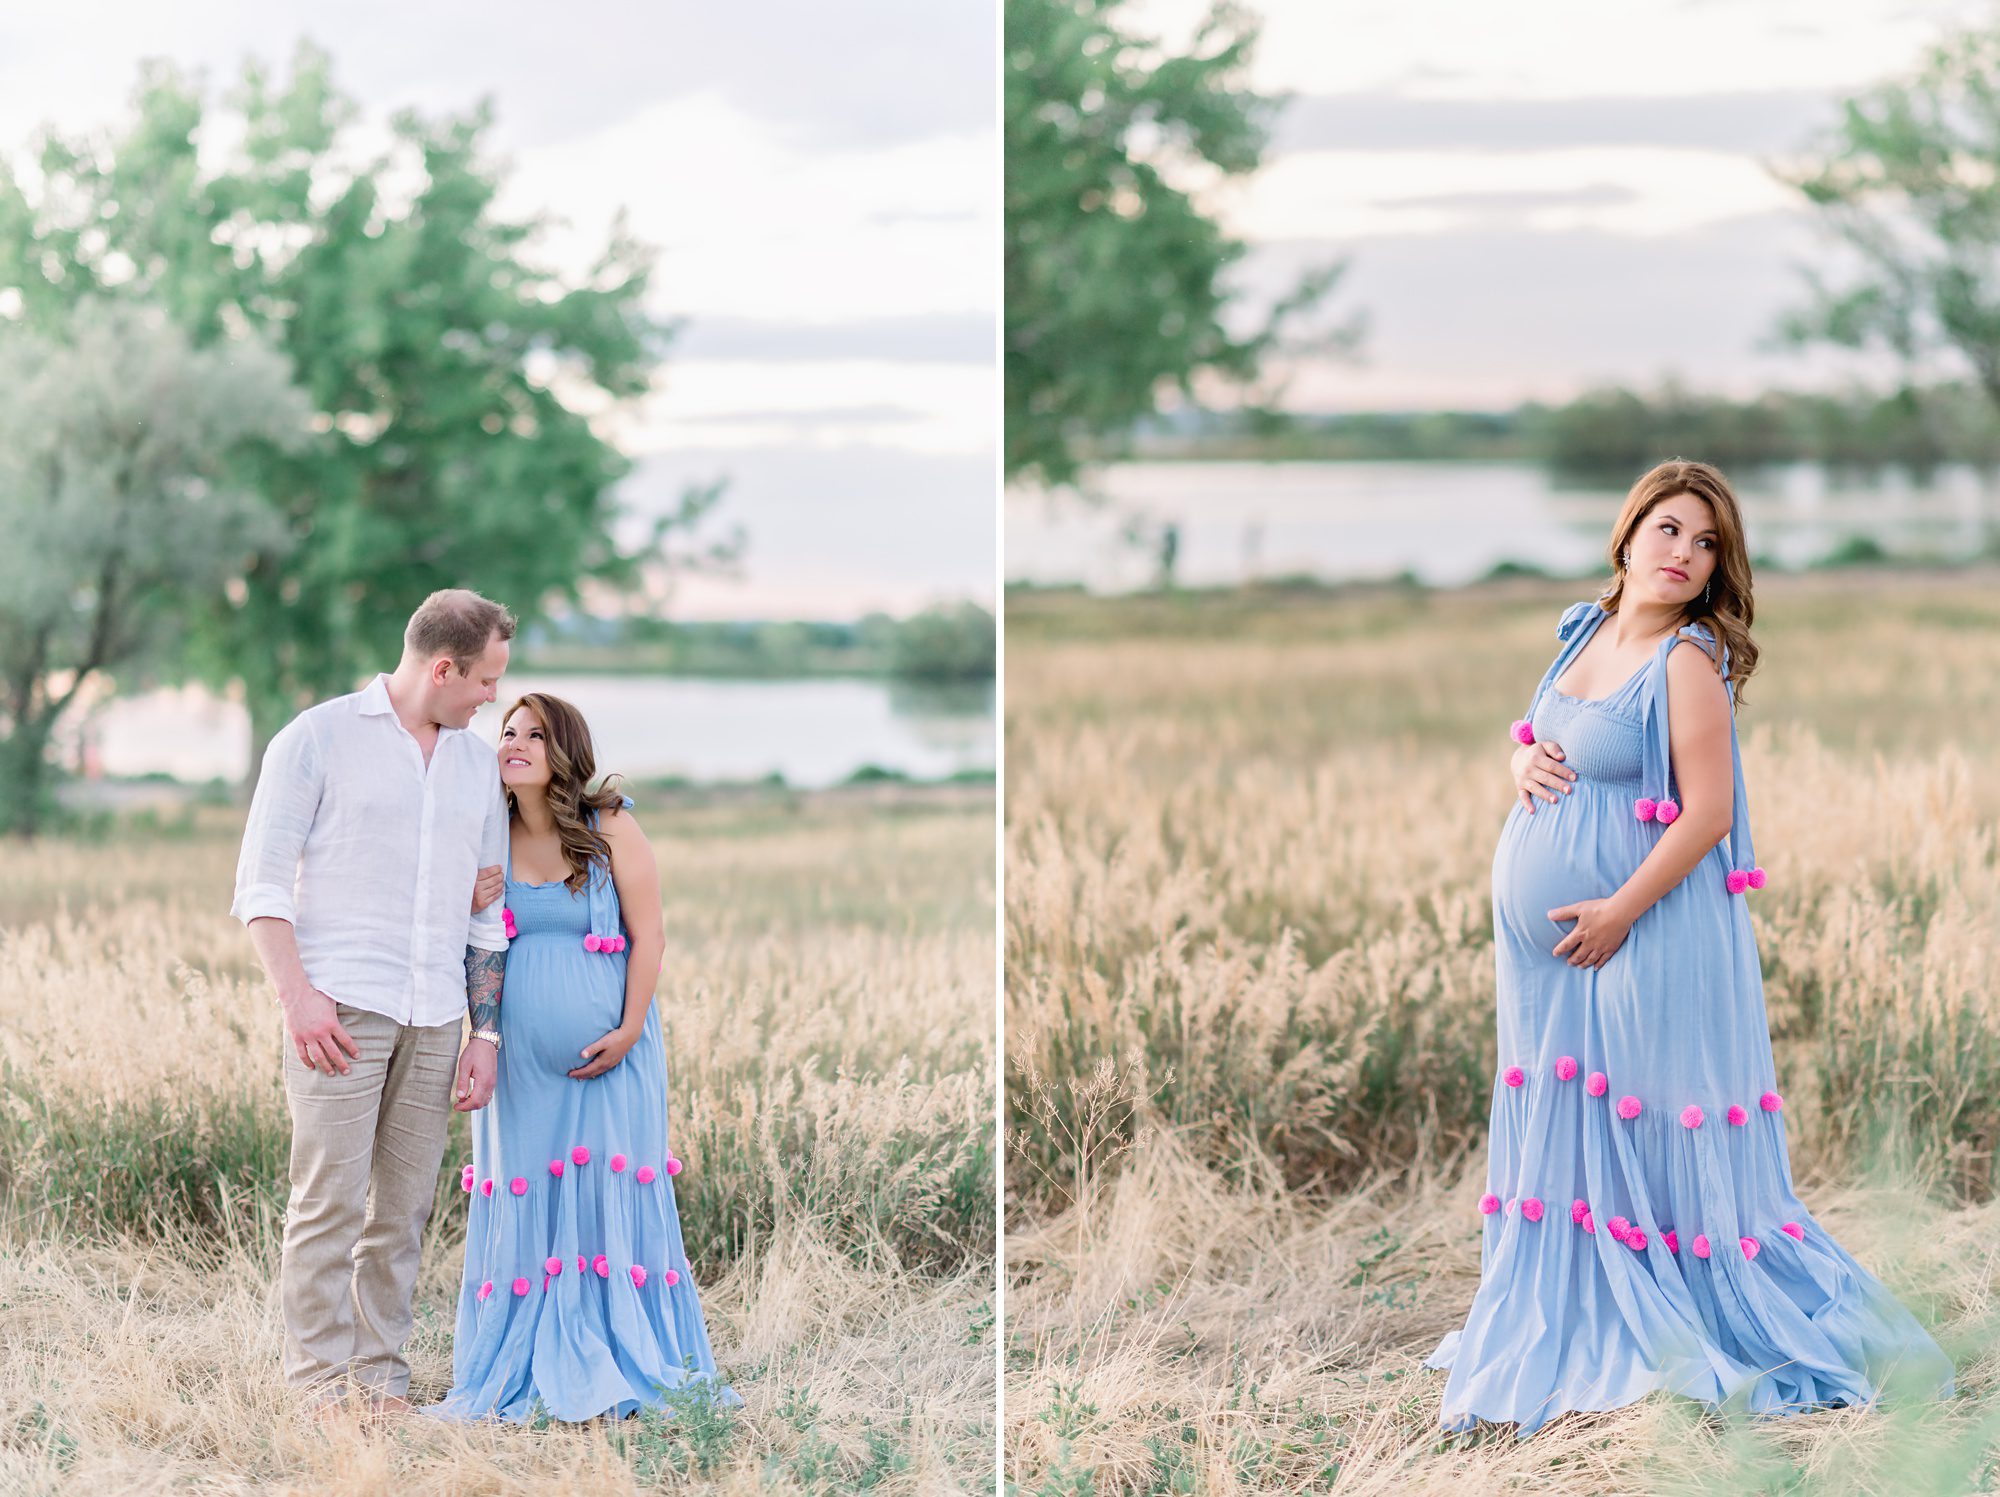 A gorgeous young couple get light and airy maternity photos done at a picturesque park in Wheat Ridge, Colorado.